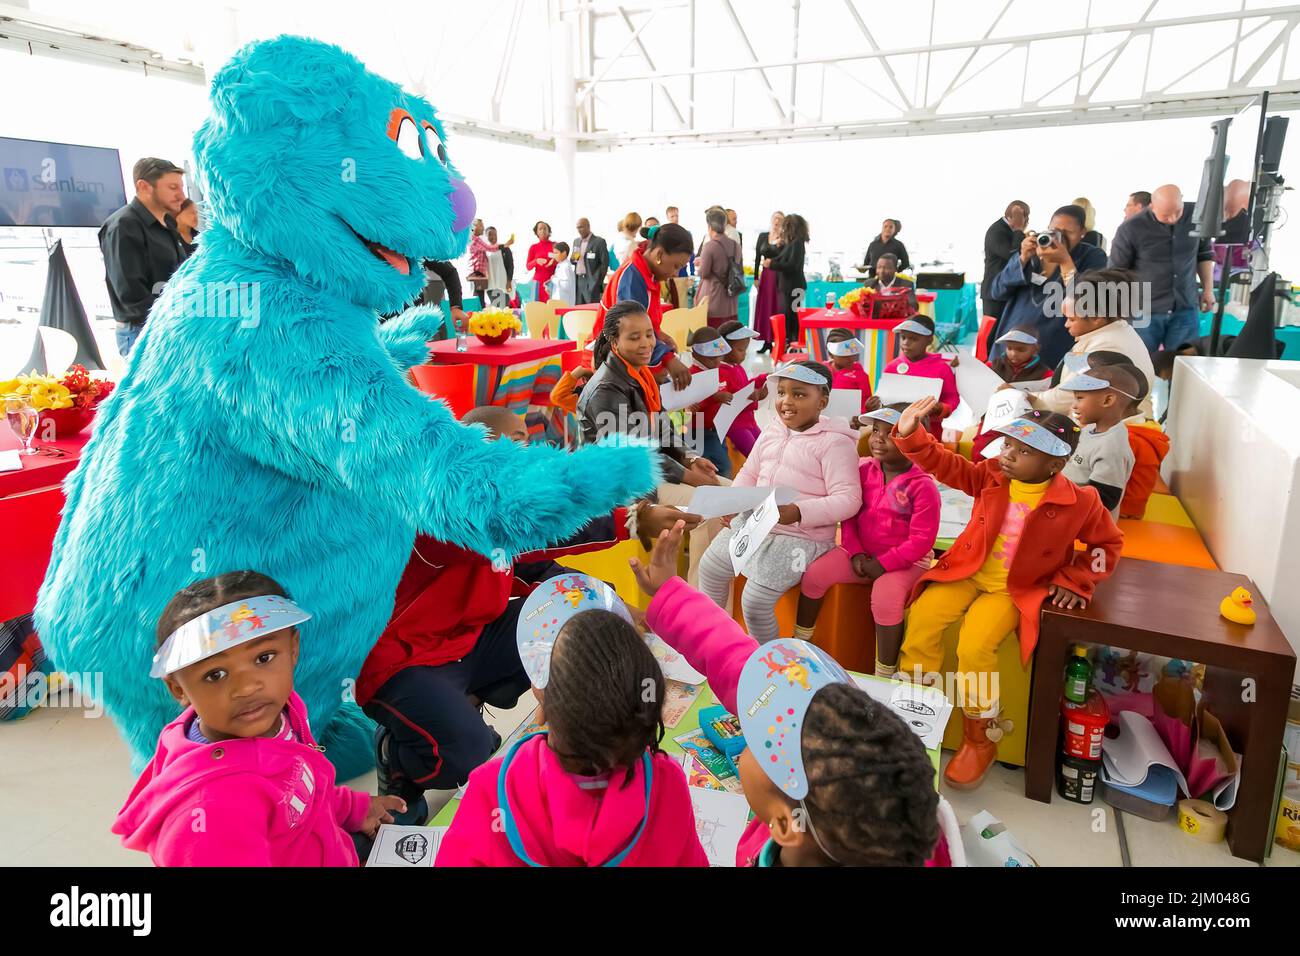 A view of African kids interacting with a person in a fluffy animal suit in Johannesburg,South Africa Stock Photo